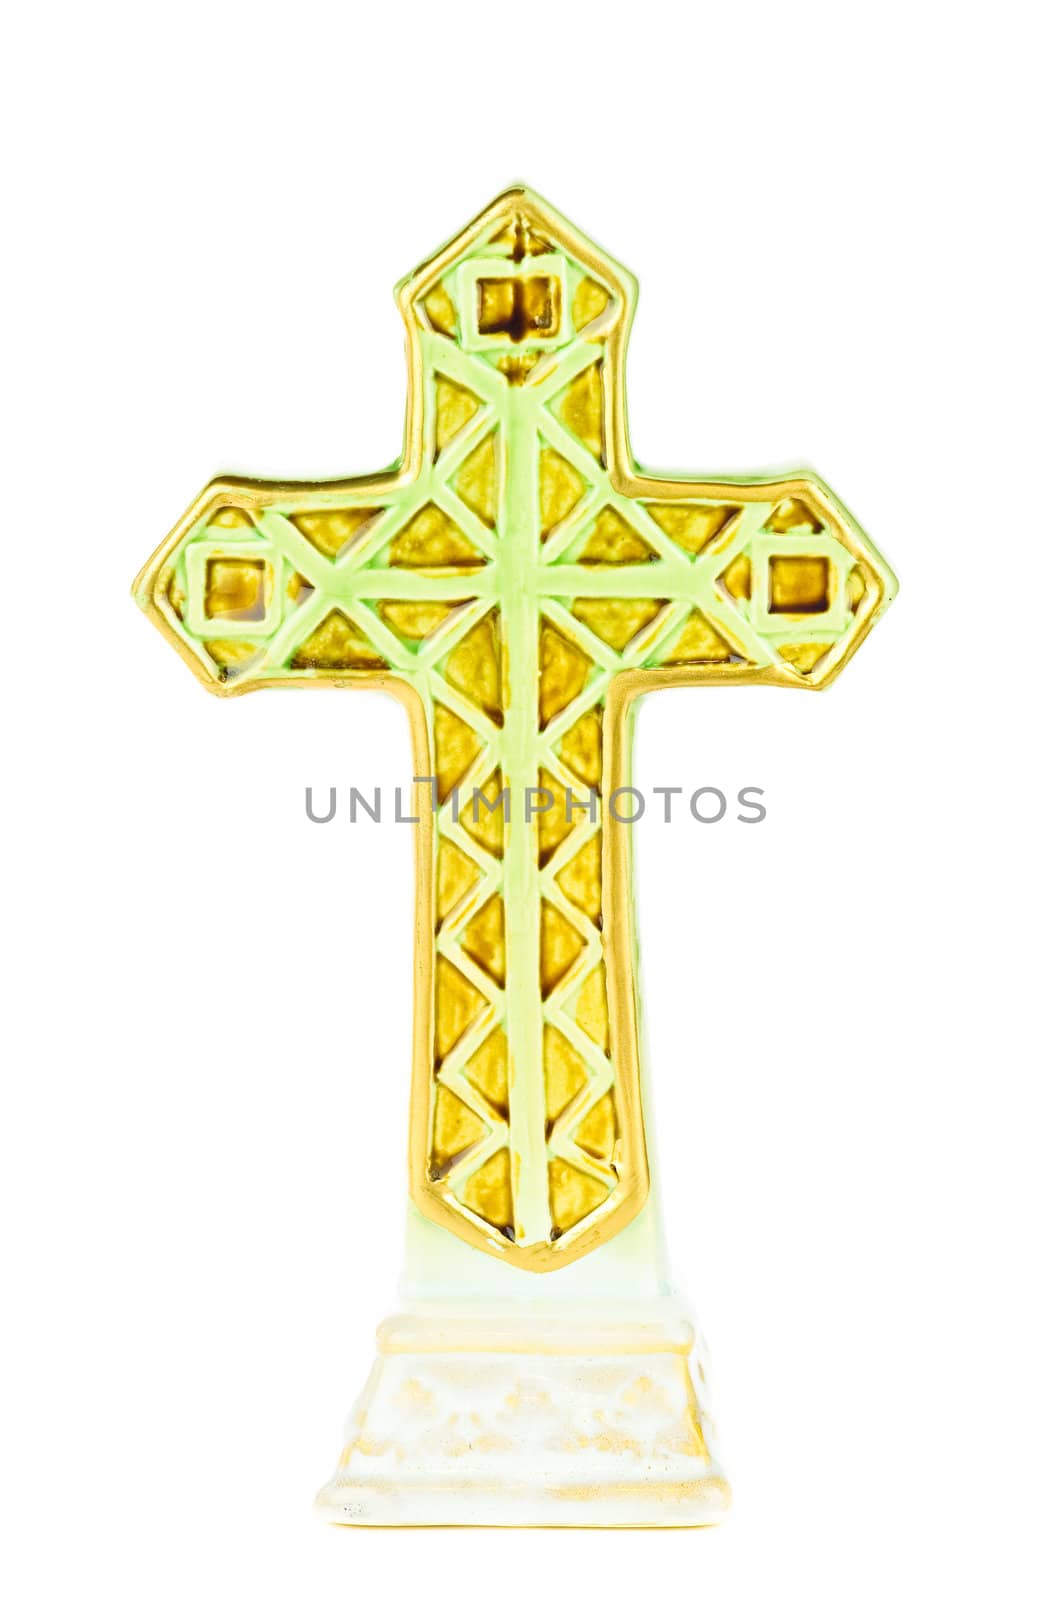 Green cross decoration; isolated on white background.